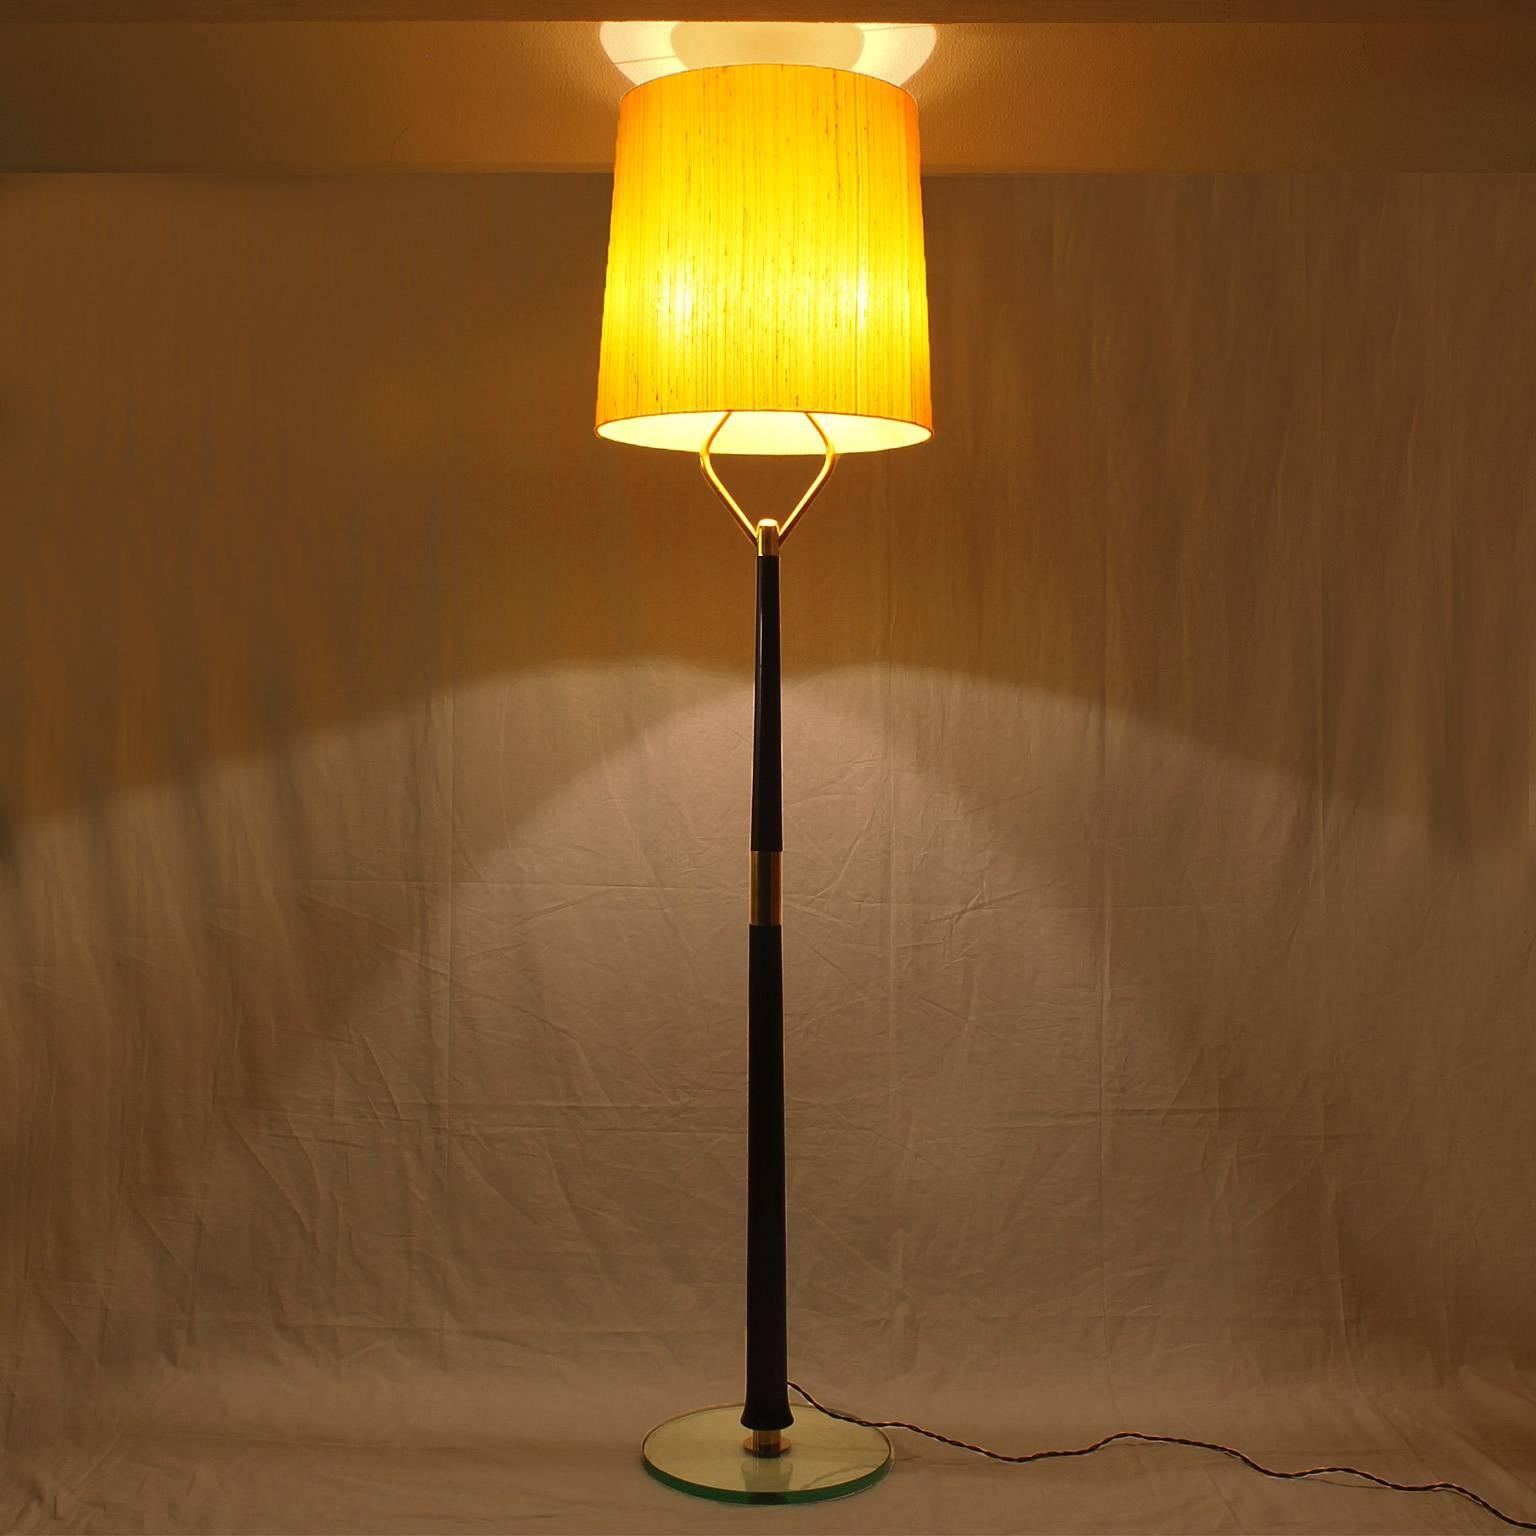 Standing lamp, solid and stained mahogany, French polish, solid polished brass, thick glass base, golden silk lampshade,

Italy, circa 1940.